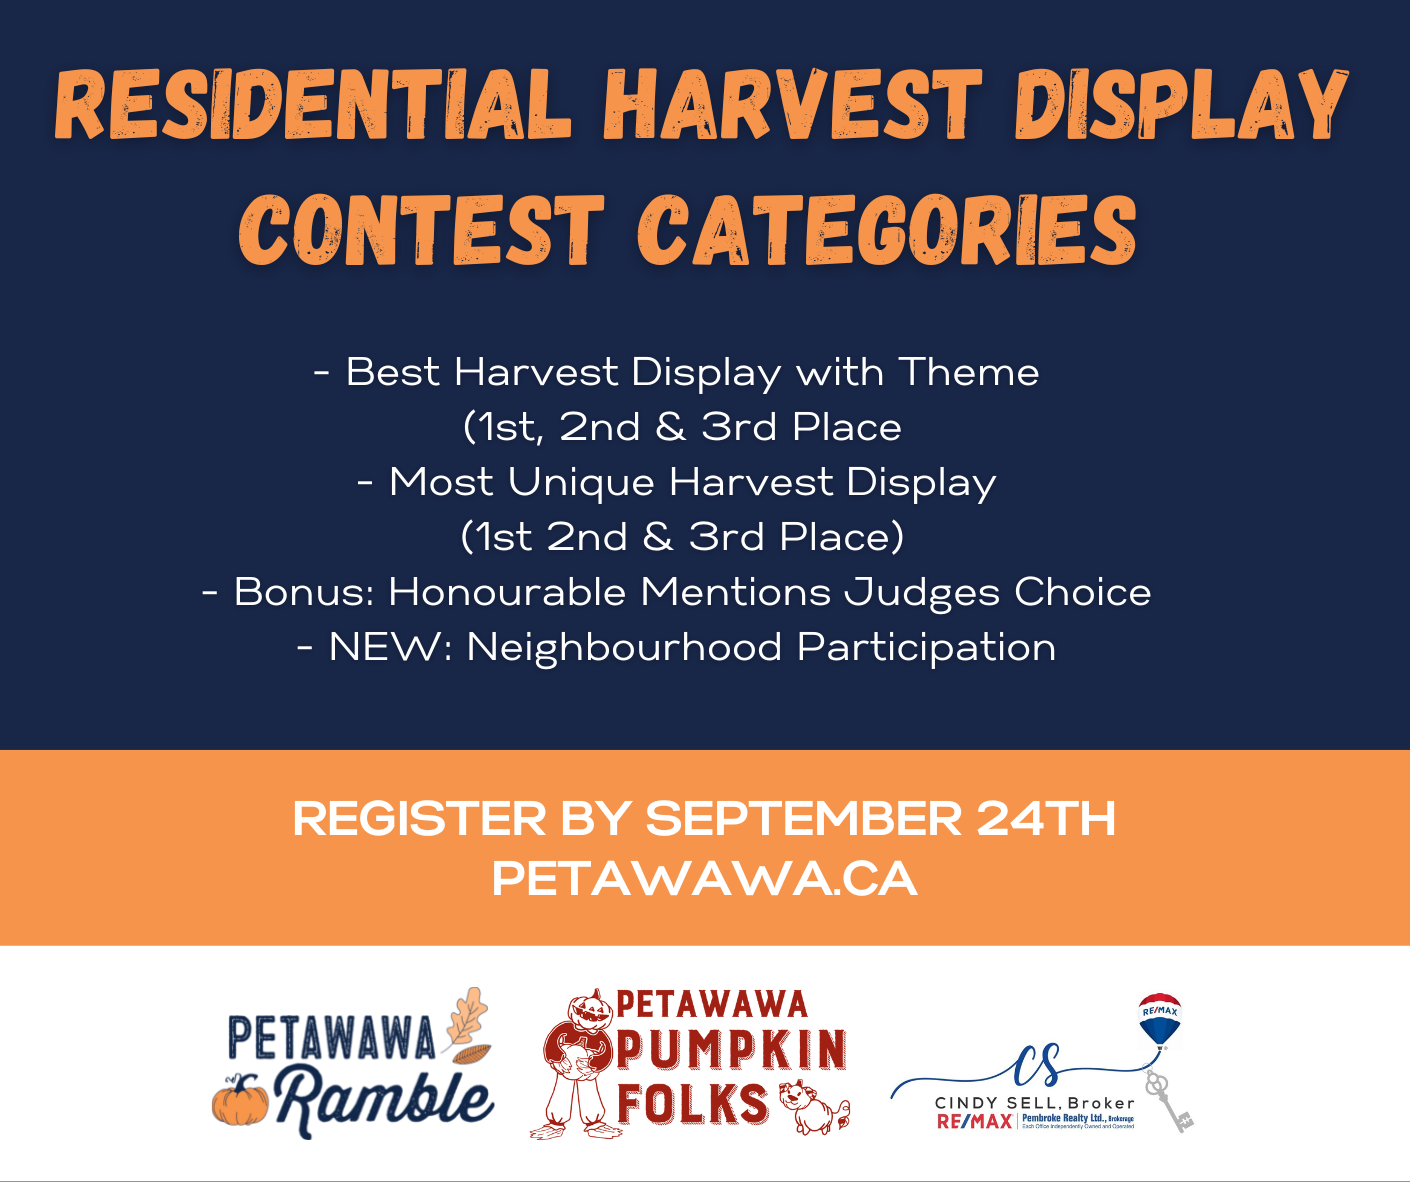 A graphic on the details of the Residential Harvest Display Contest